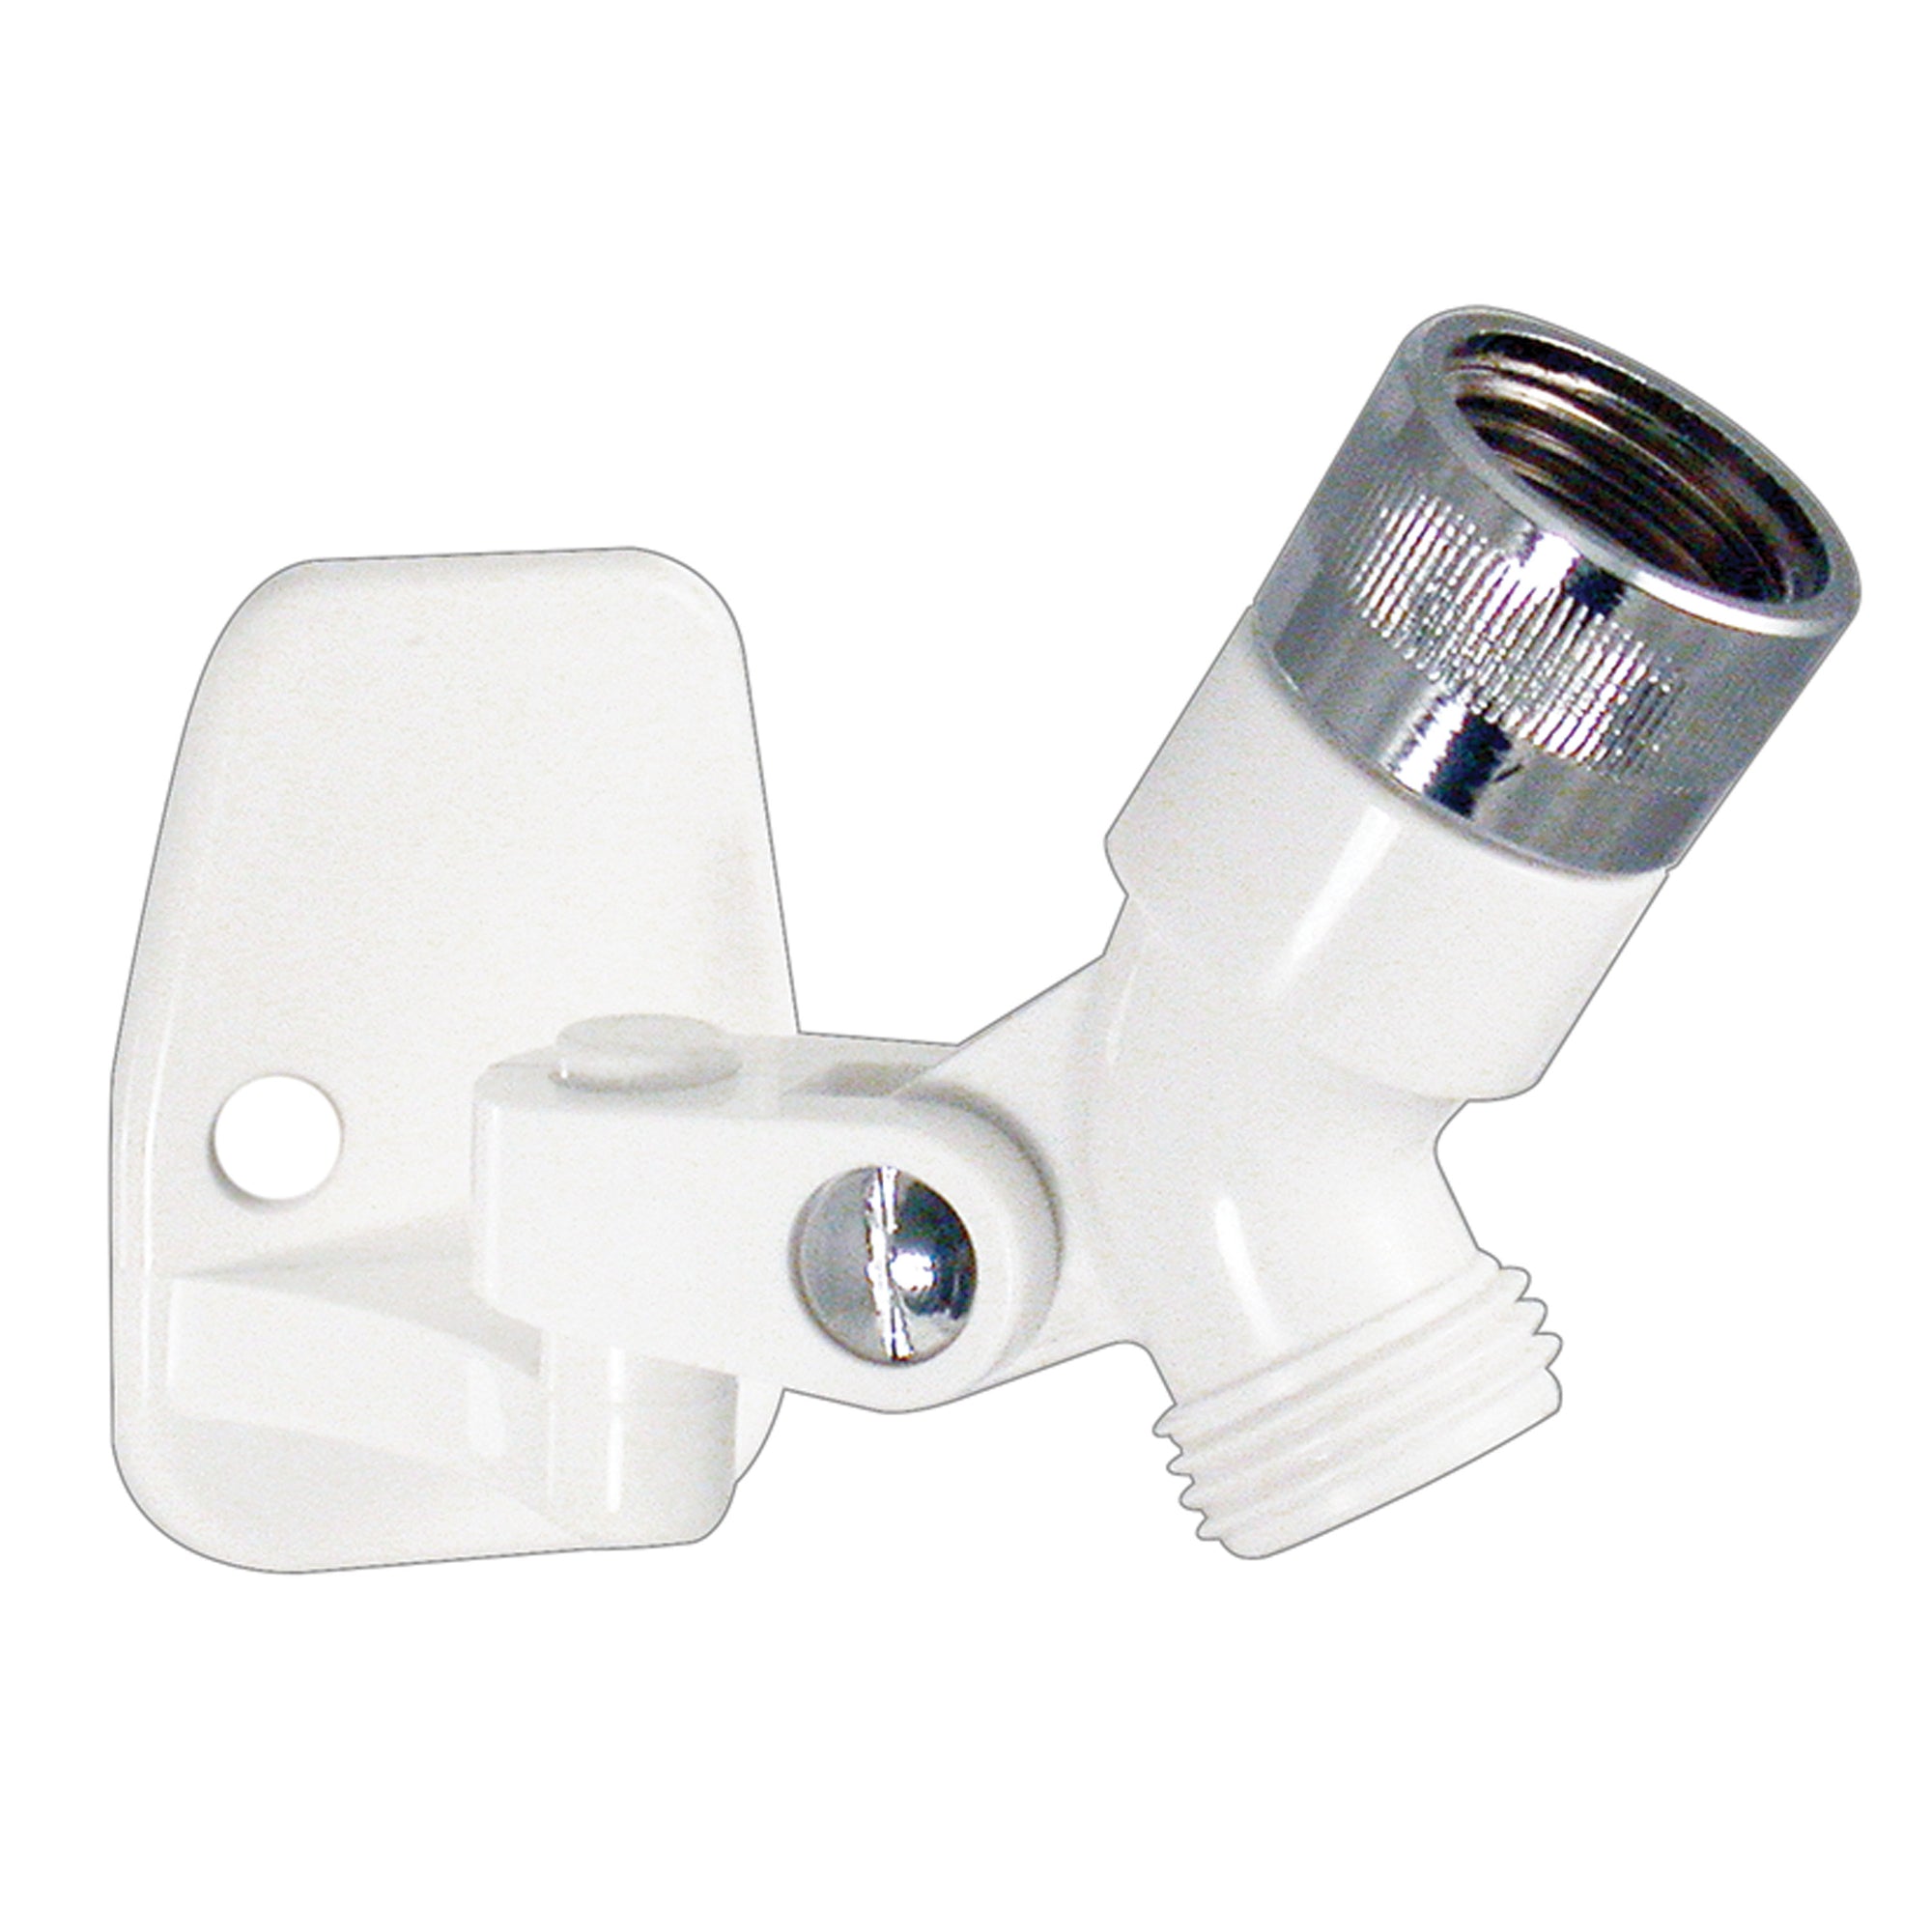 Phoenix Faucets by Valterra PF276003 Swivel Shower Connector and Wall Bracket for Handheld Shower - White